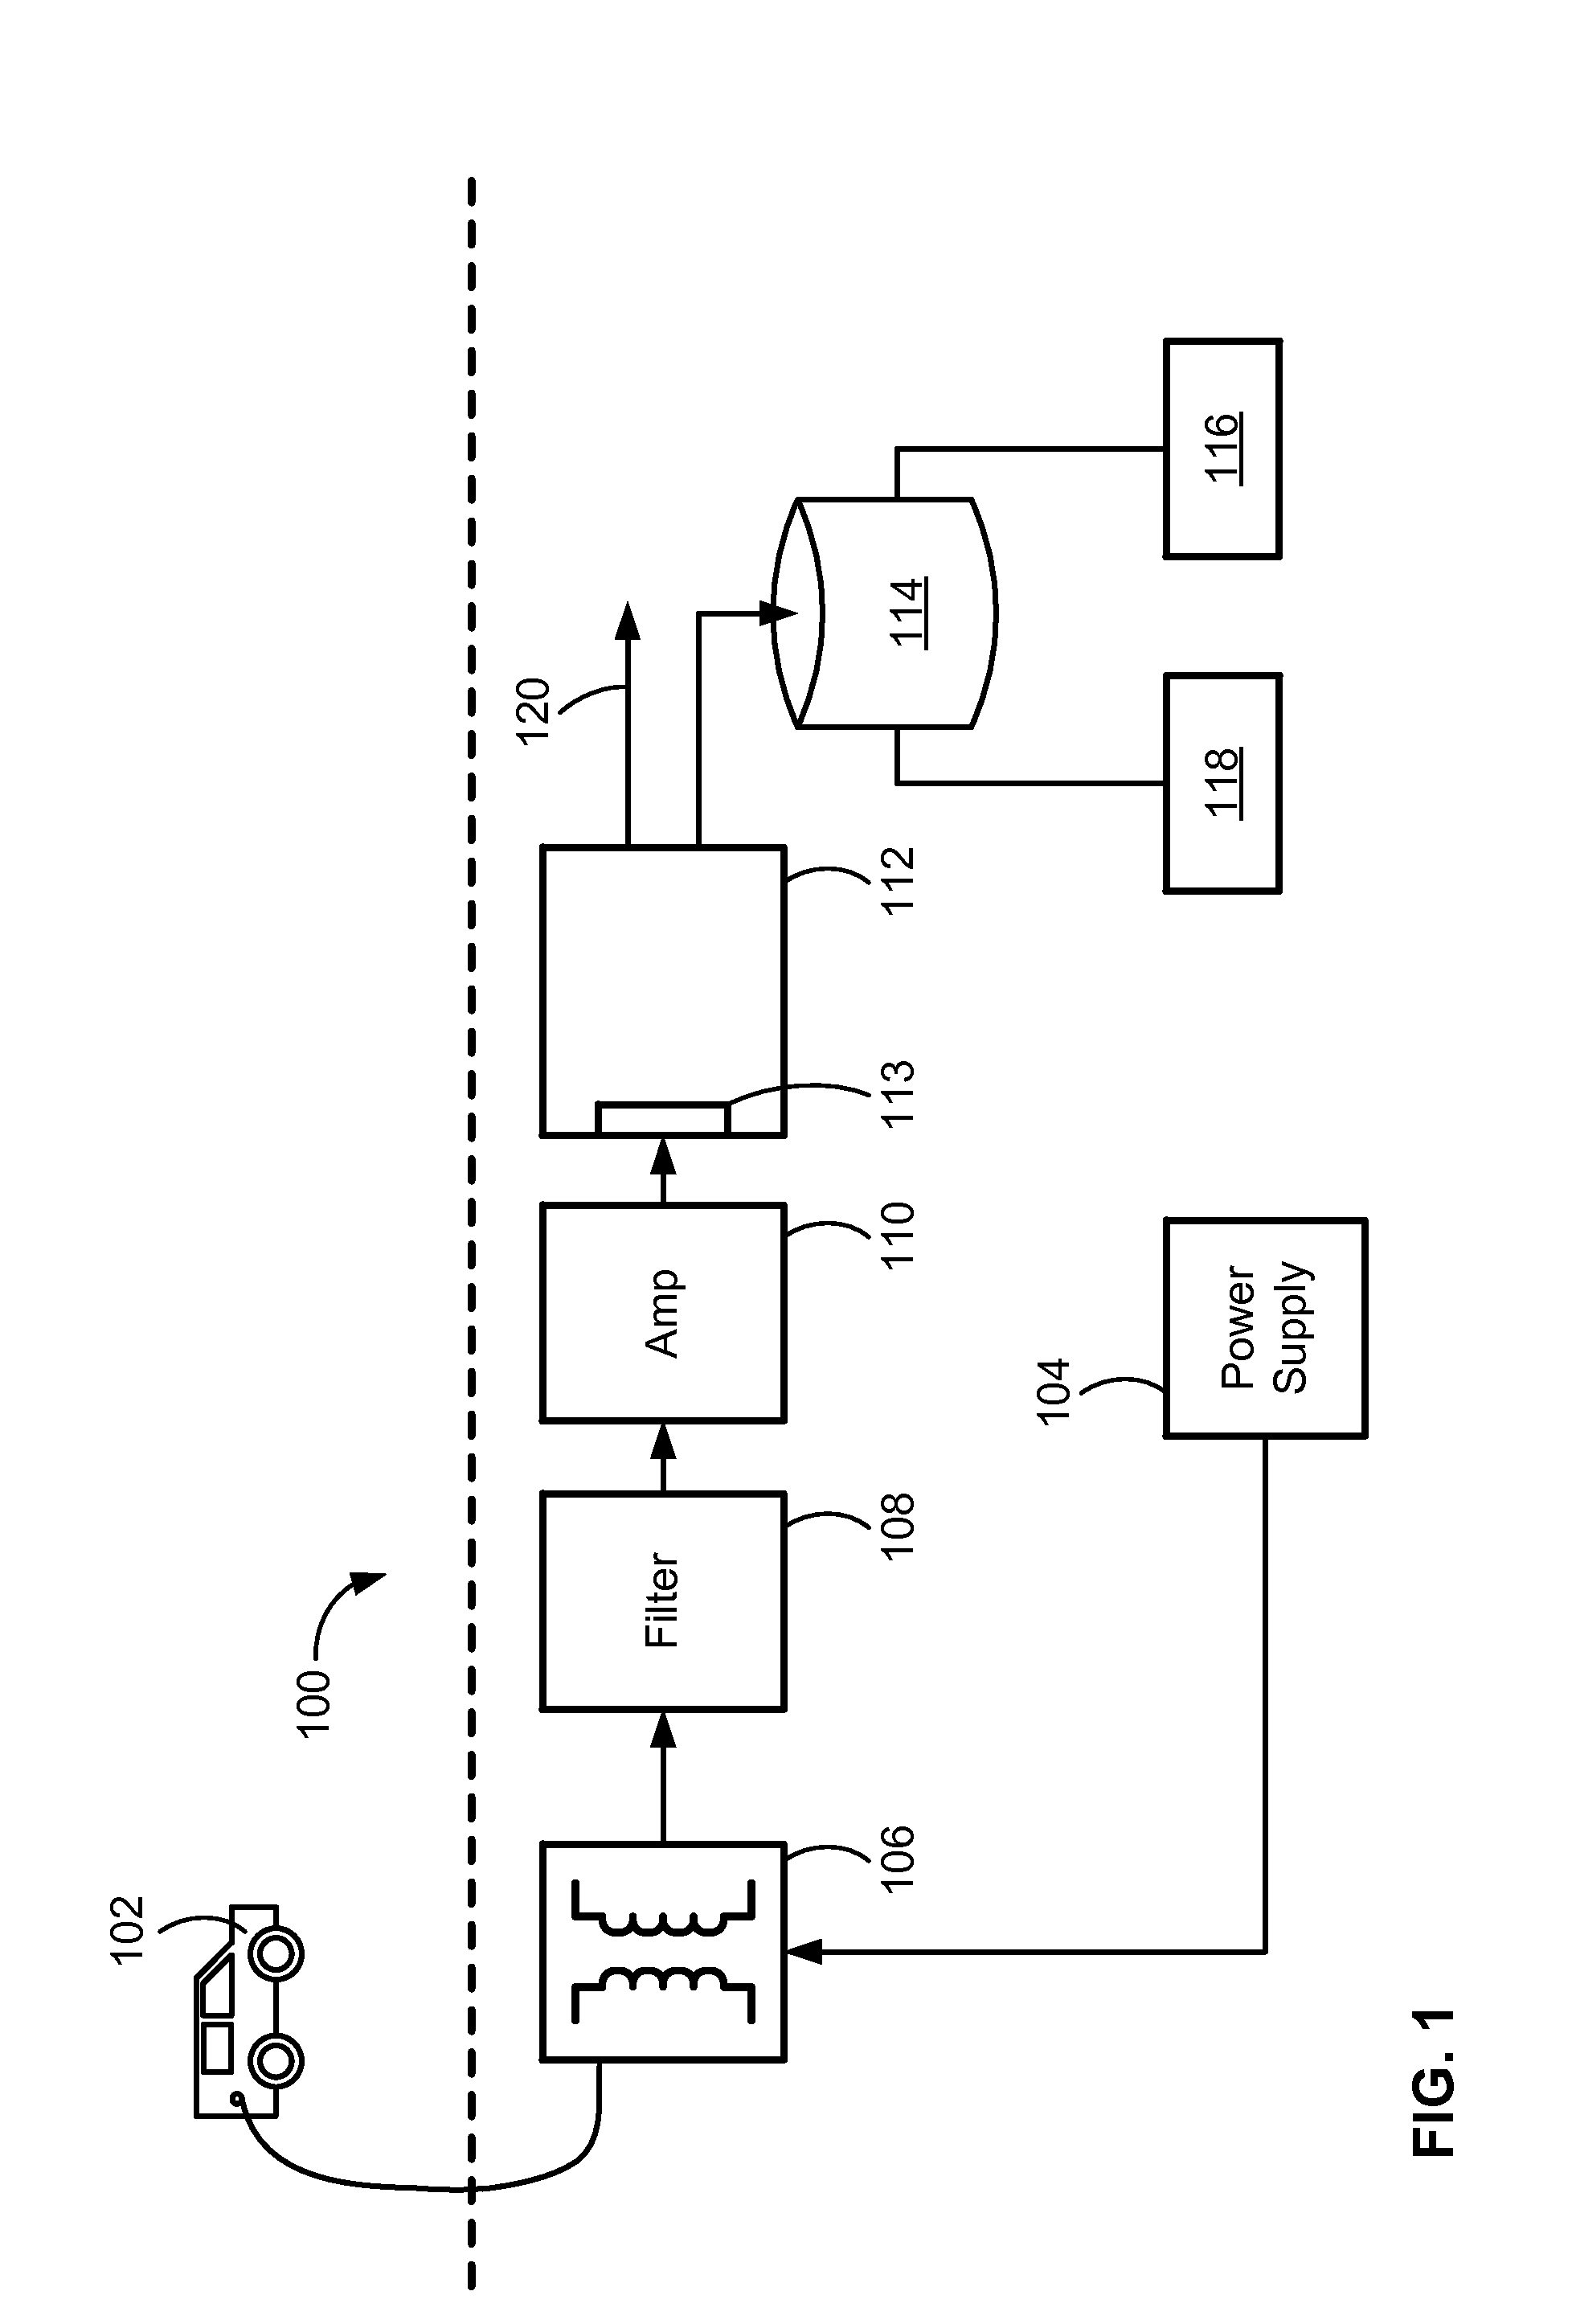 Auto detection of vehicle type connected to an evse